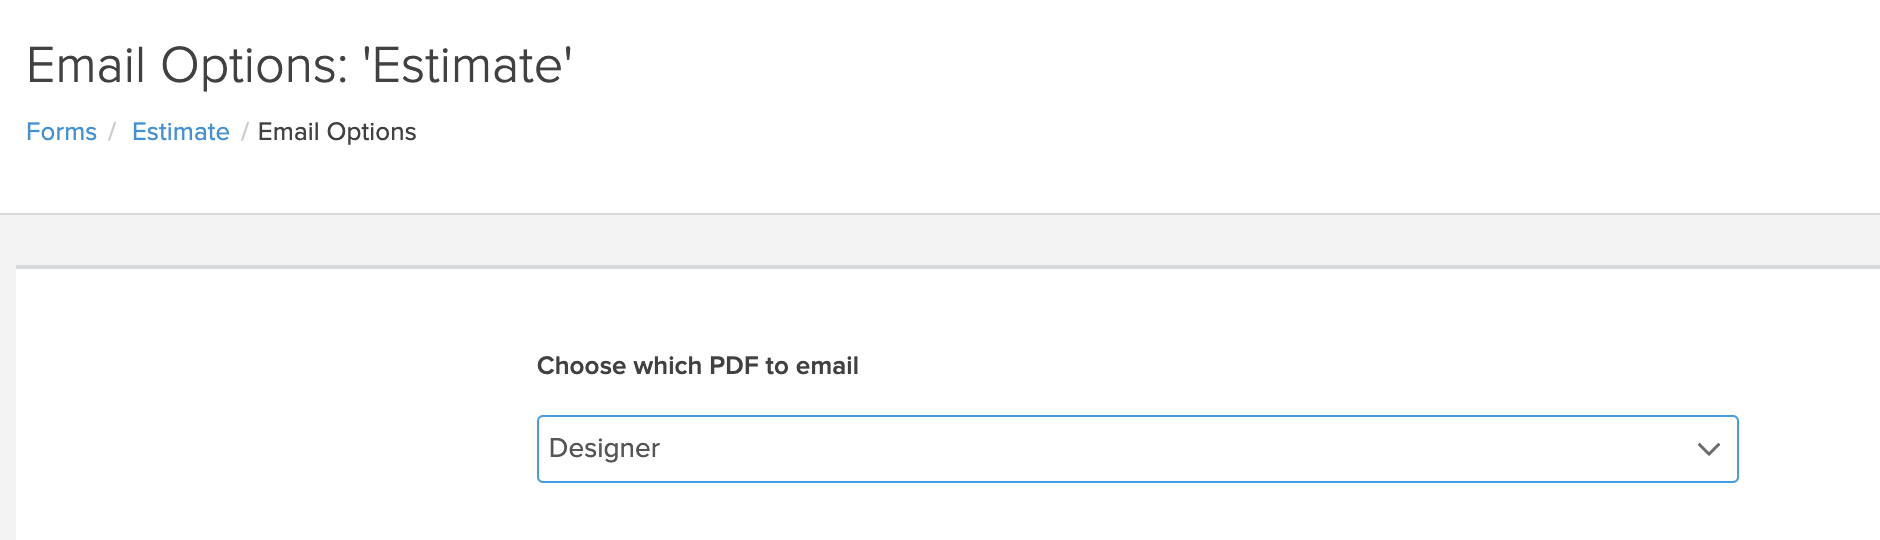 Form Settings_Email Options_Choose PDF.png